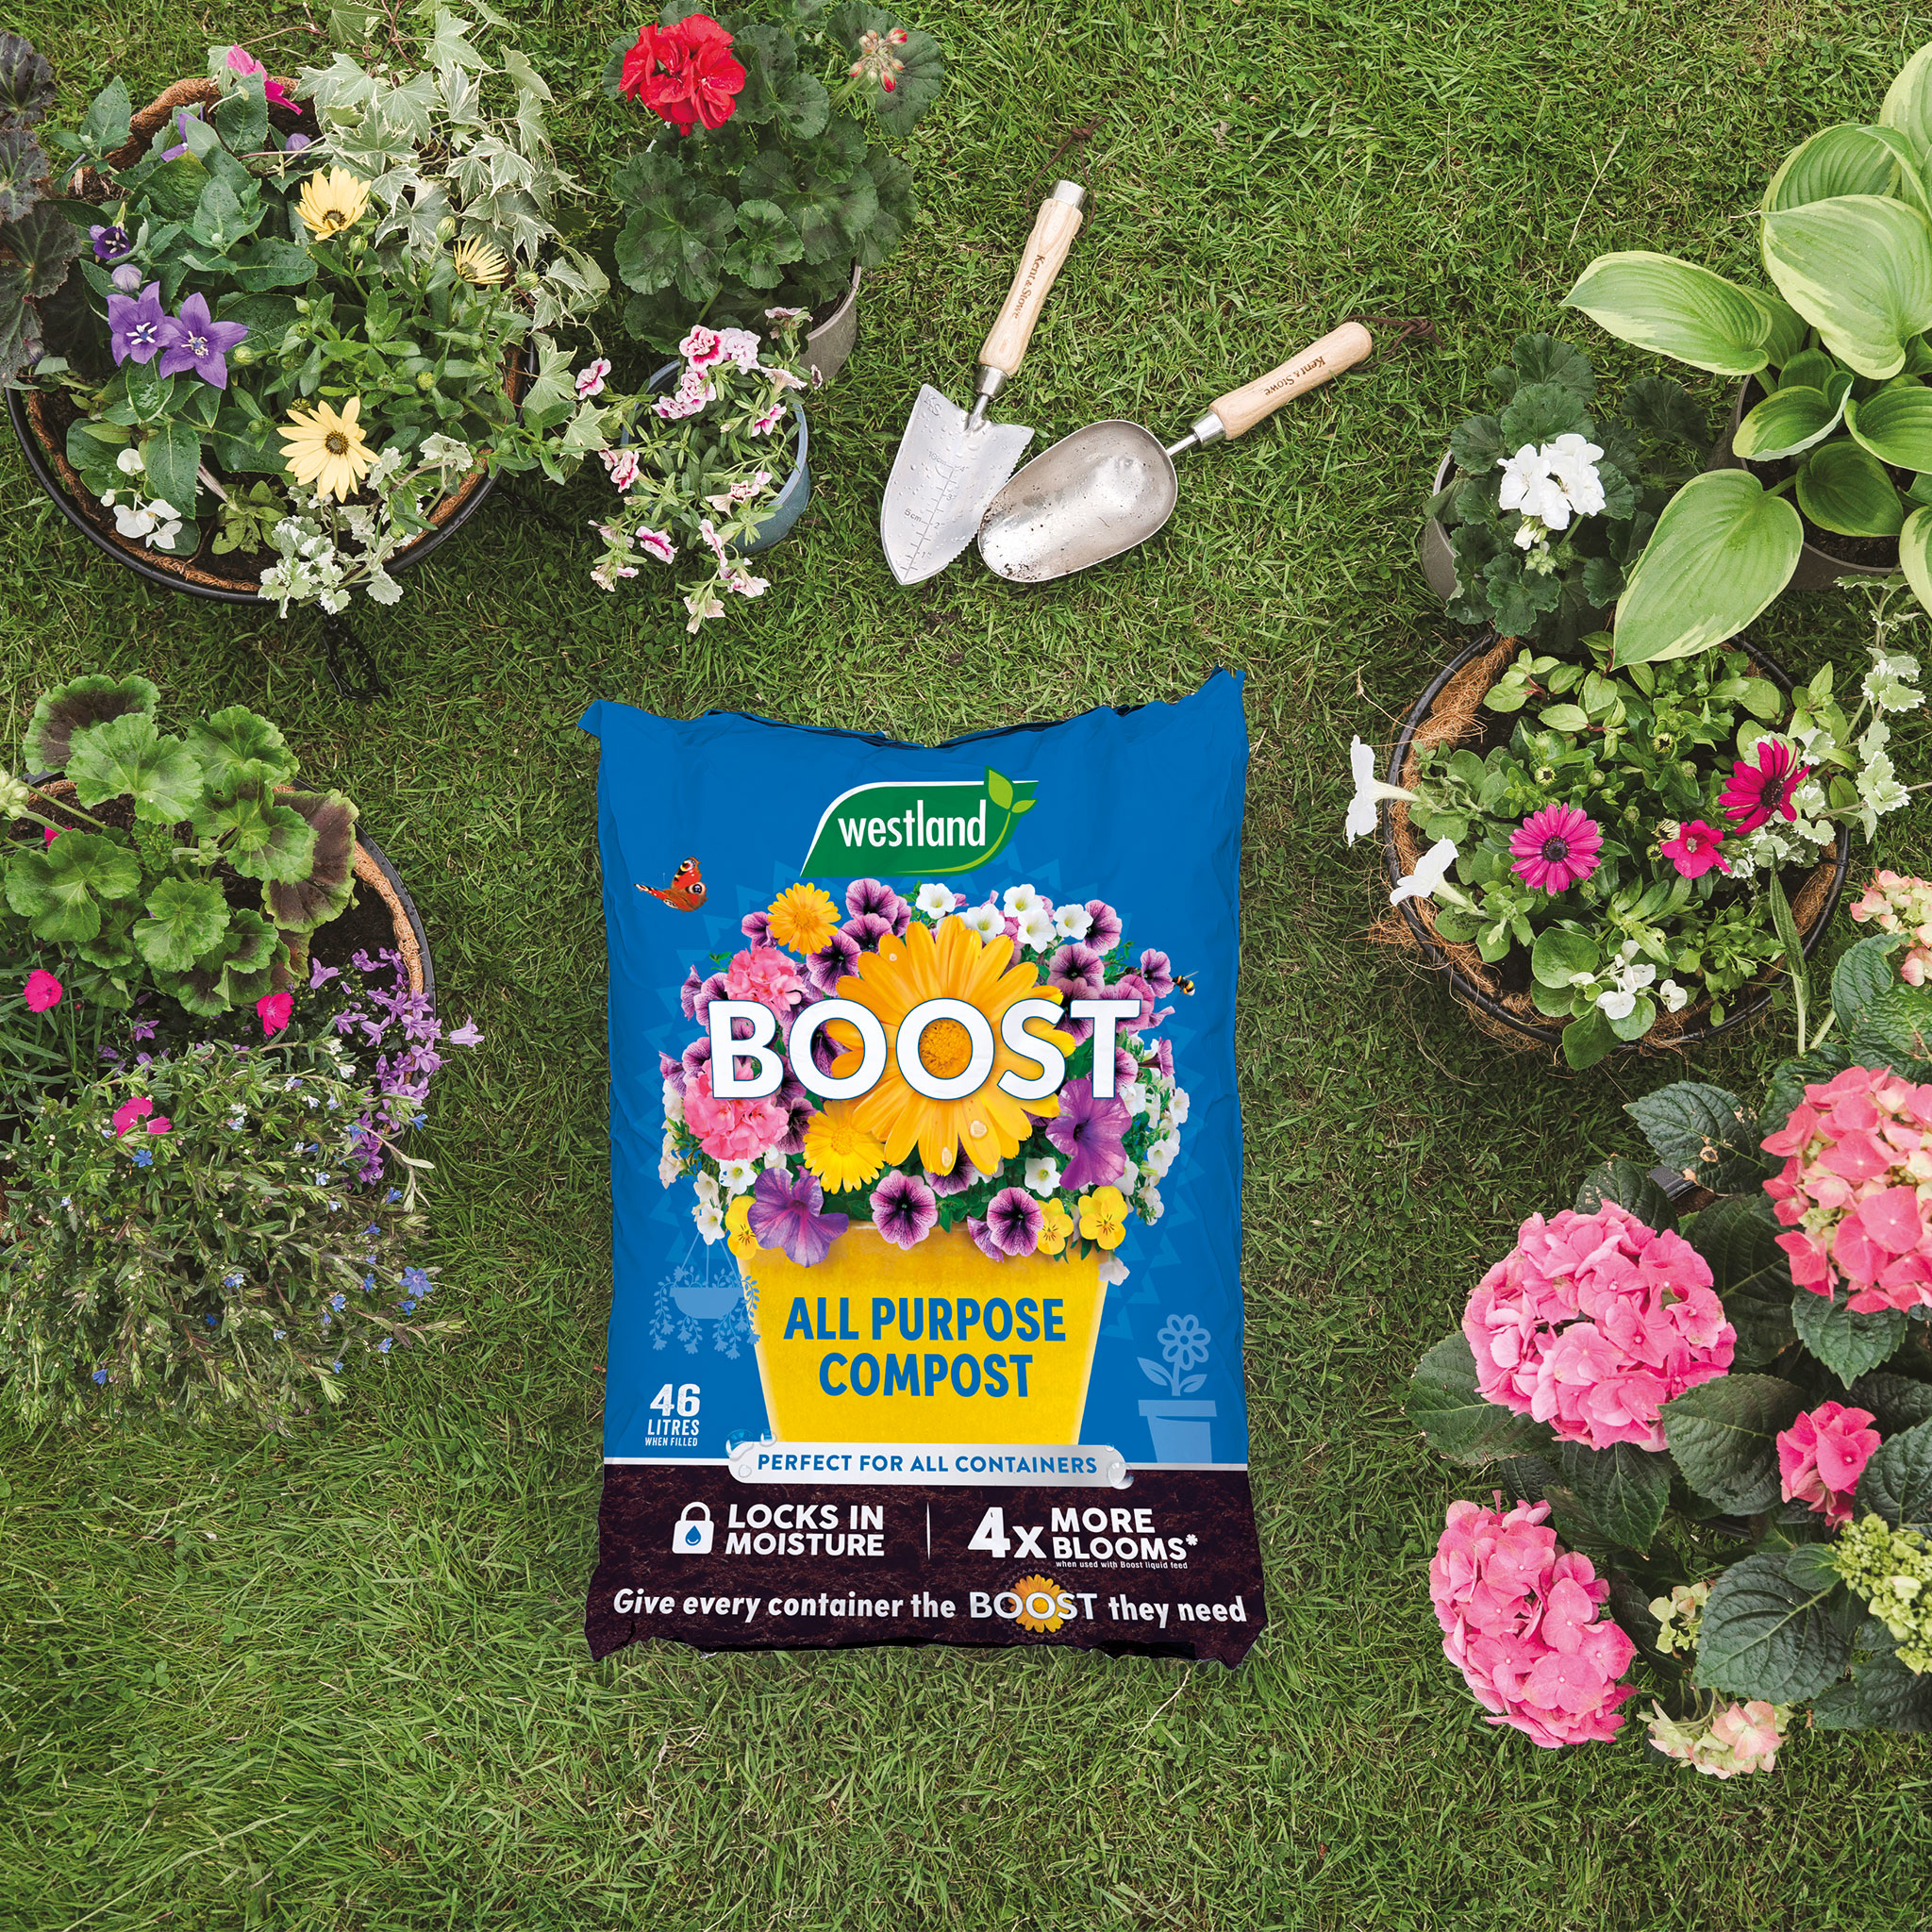 boost all purpose compost lifestyle on grass